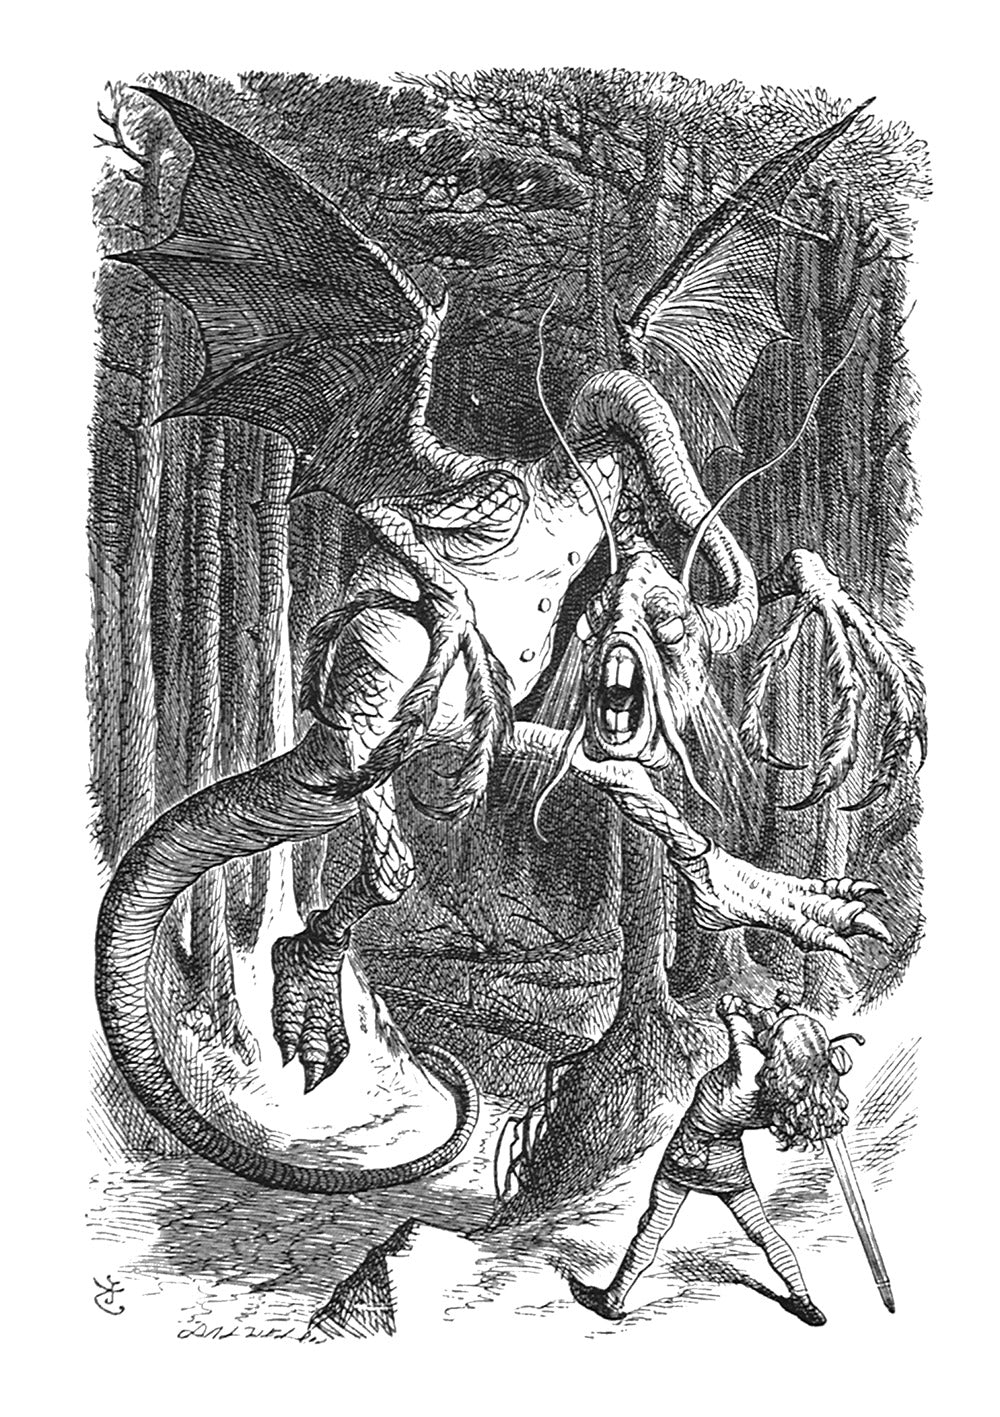 The Jabberwock, with eyes a flame, Came whiffling through the tulgey wood...